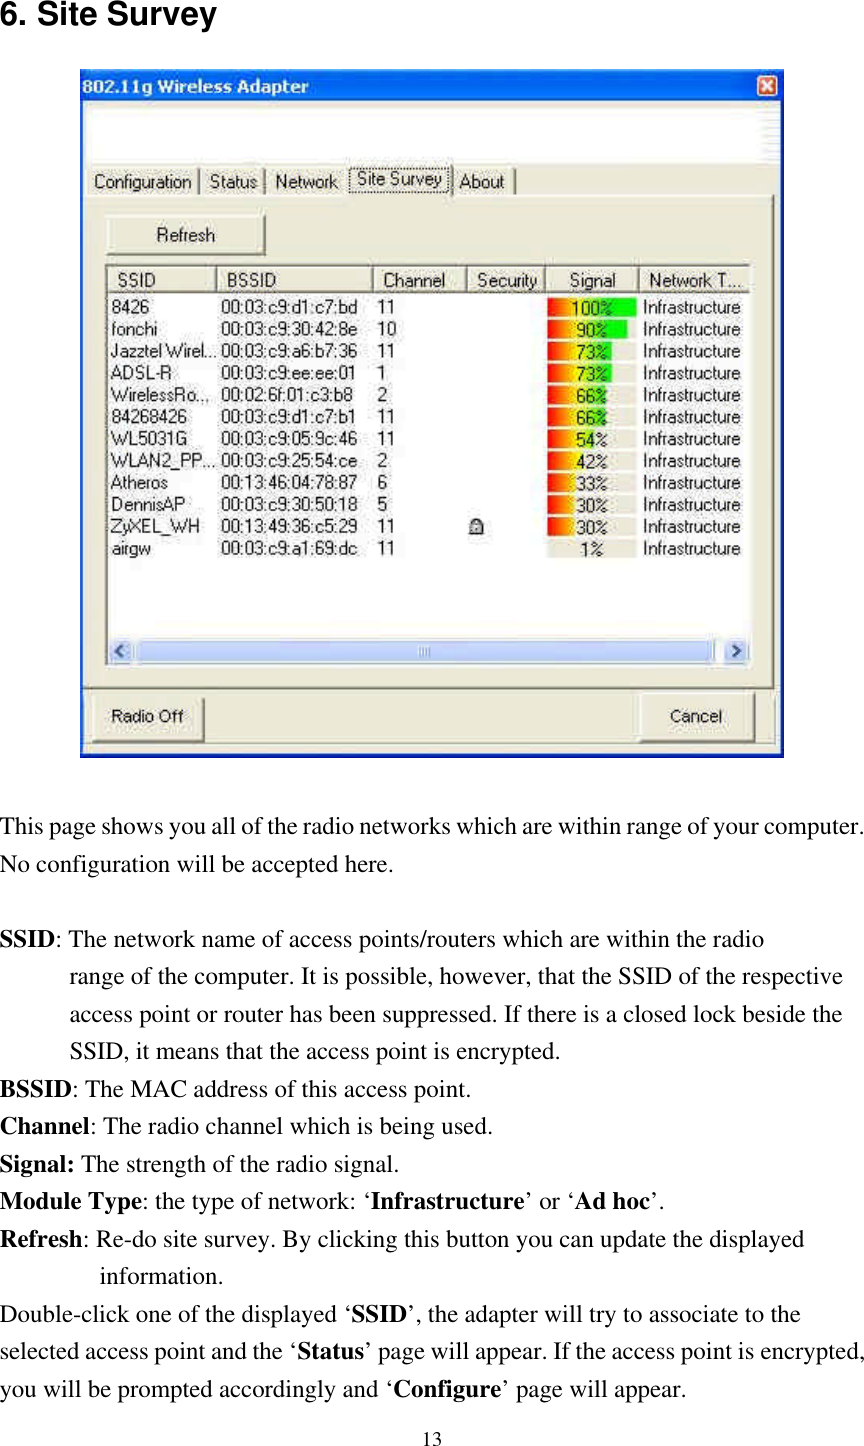 13 6. Site Survey   This page shows you all of the radio networks which are within range of your computer.  No configuration will be accepted here.  SSID: The network name of access points/routers which are within the radio         range of the computer. It is possible, however, that the SSID of the respective         access point or router has been suppressed. If there is a closed lock beside the         SSID, it means that the access point is encrypted. BSSID: The MAC address of this access point. Channel: The radio channel which is being used. Signal: The strength of the radio signal. Module Type: the type of network: ‘Infrastructure’ or ‘Ad hoc’.  Refresh: Re-do site survey. By clicking this button you can update the displayed            information.  Double-click one of the displayed ‘SSID’, the adapter will try to associate to the selected access point and the ‘Status’ page will appear. If the access point is encrypted, you will be prompted accordingly and ‘Configure’ page will appear. 